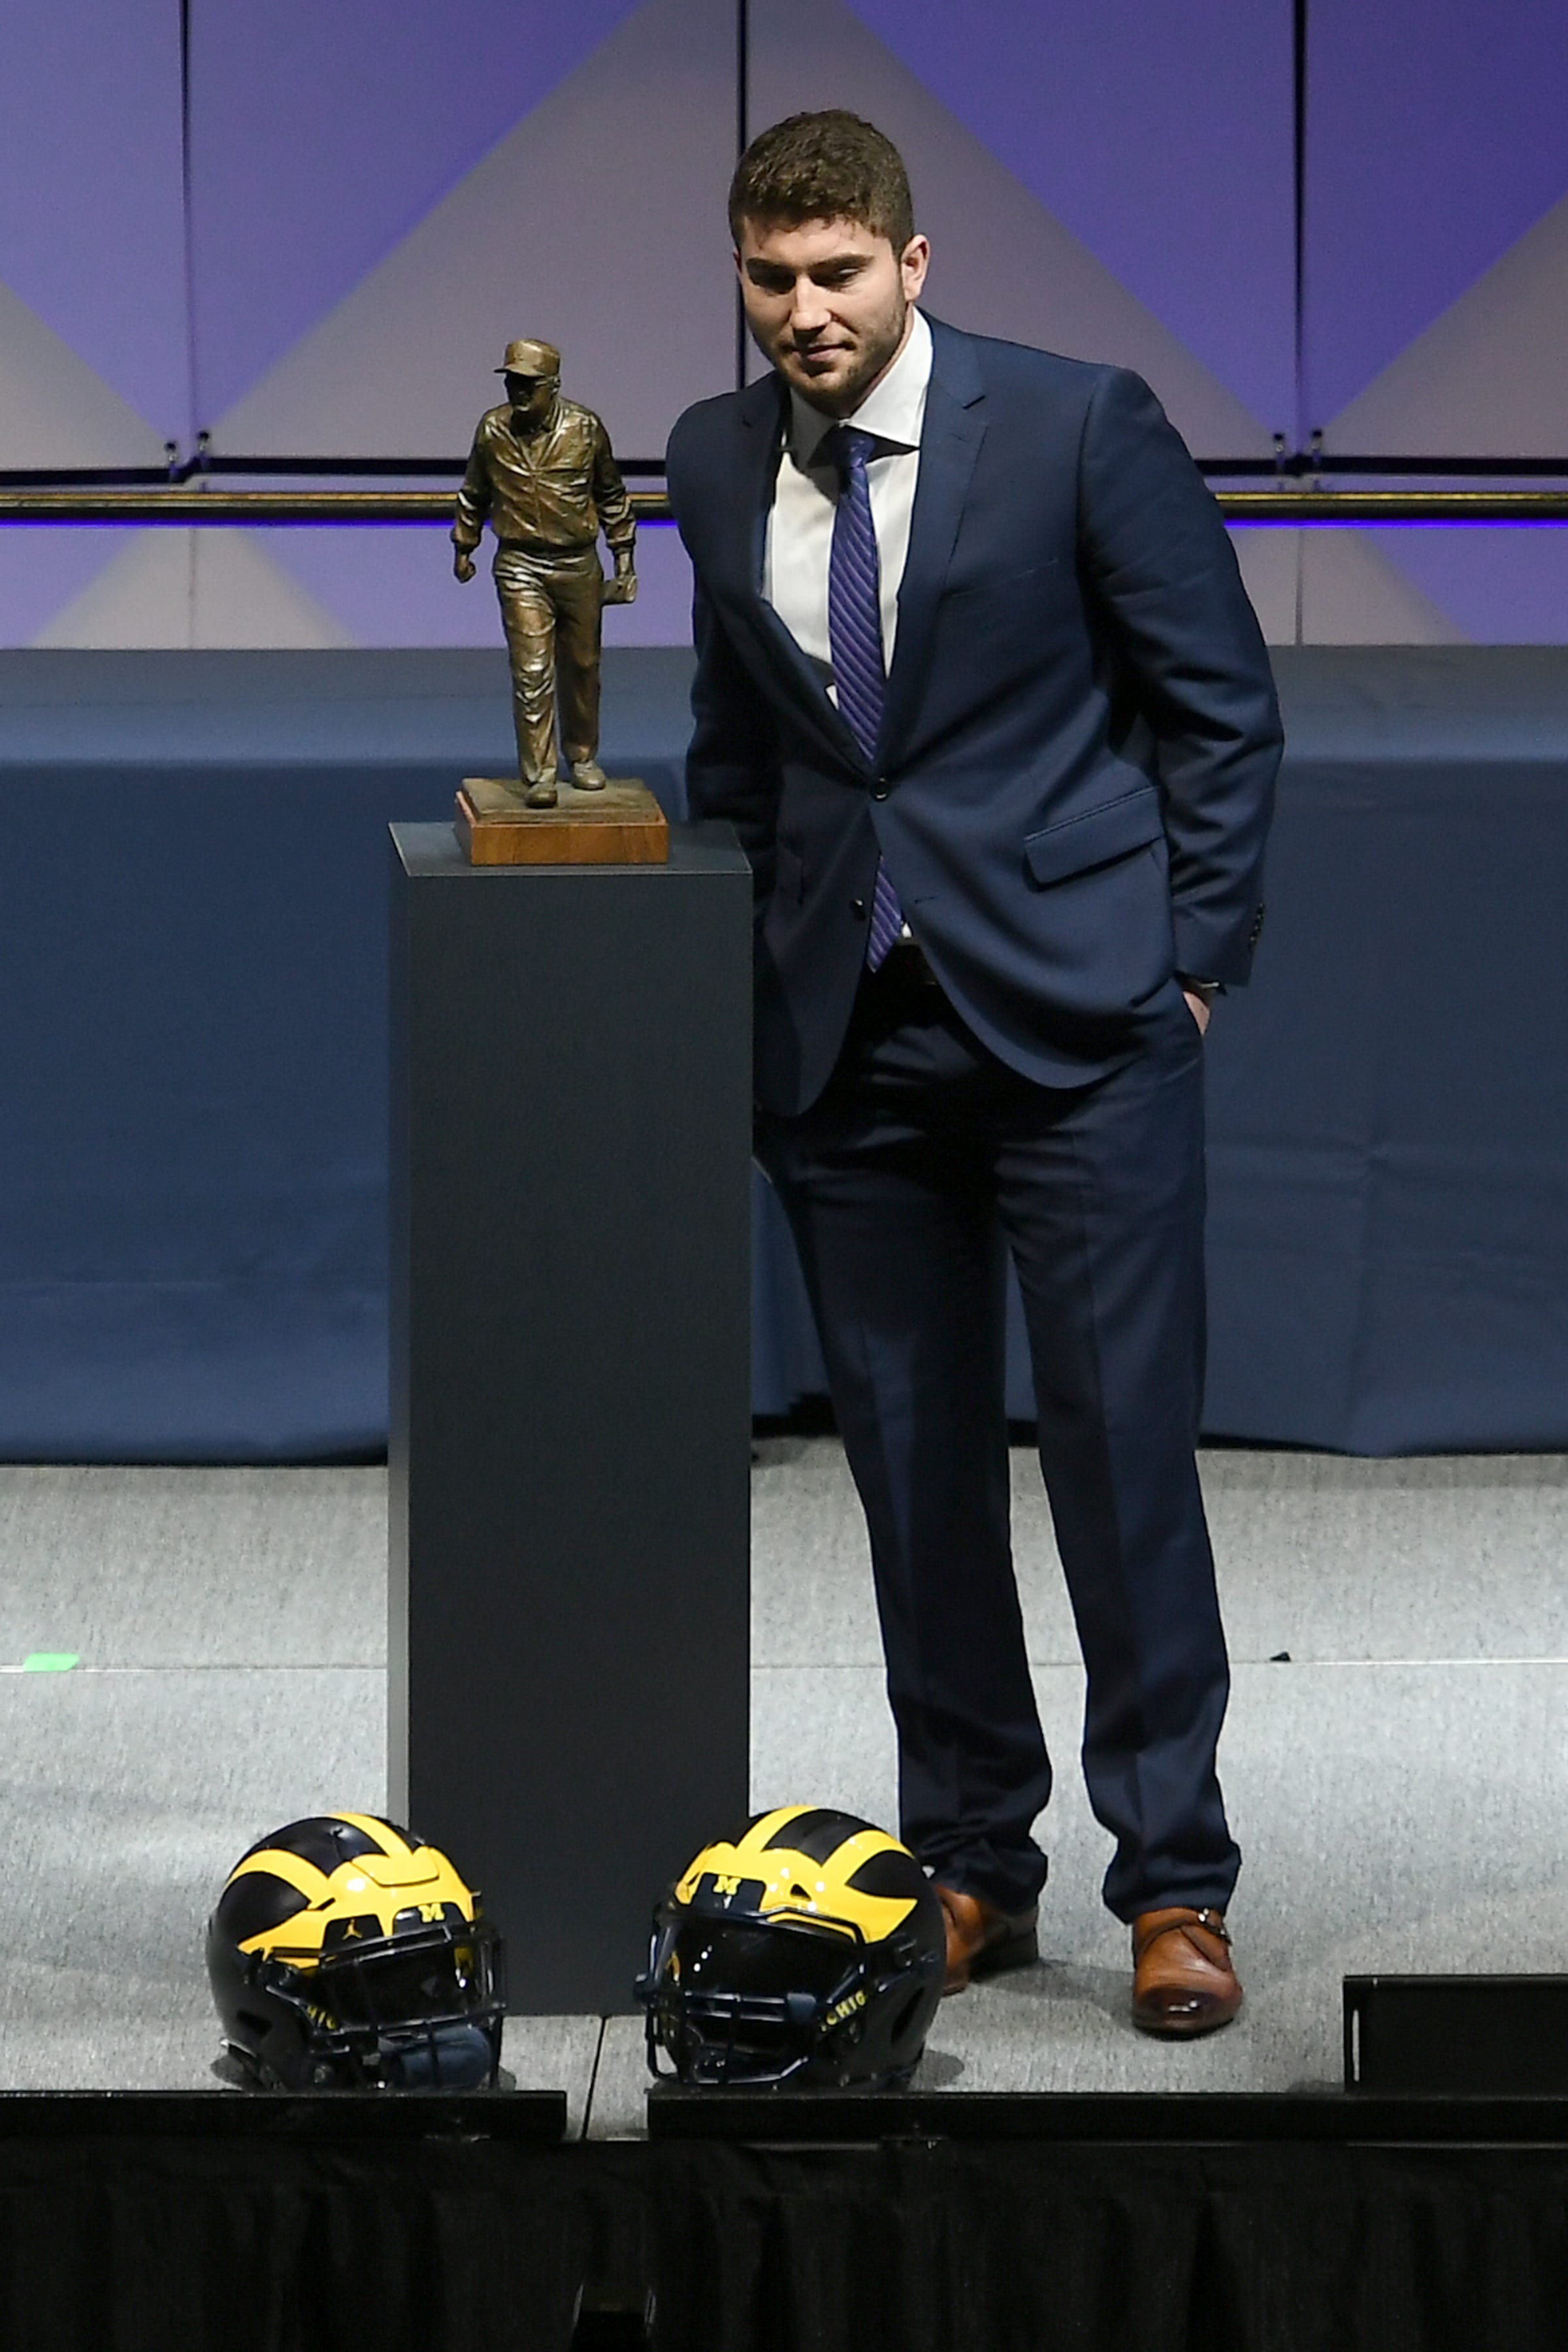 Michigan quarterback Shea Patterson poses after being named Michigan's Offensive Player of the Year.